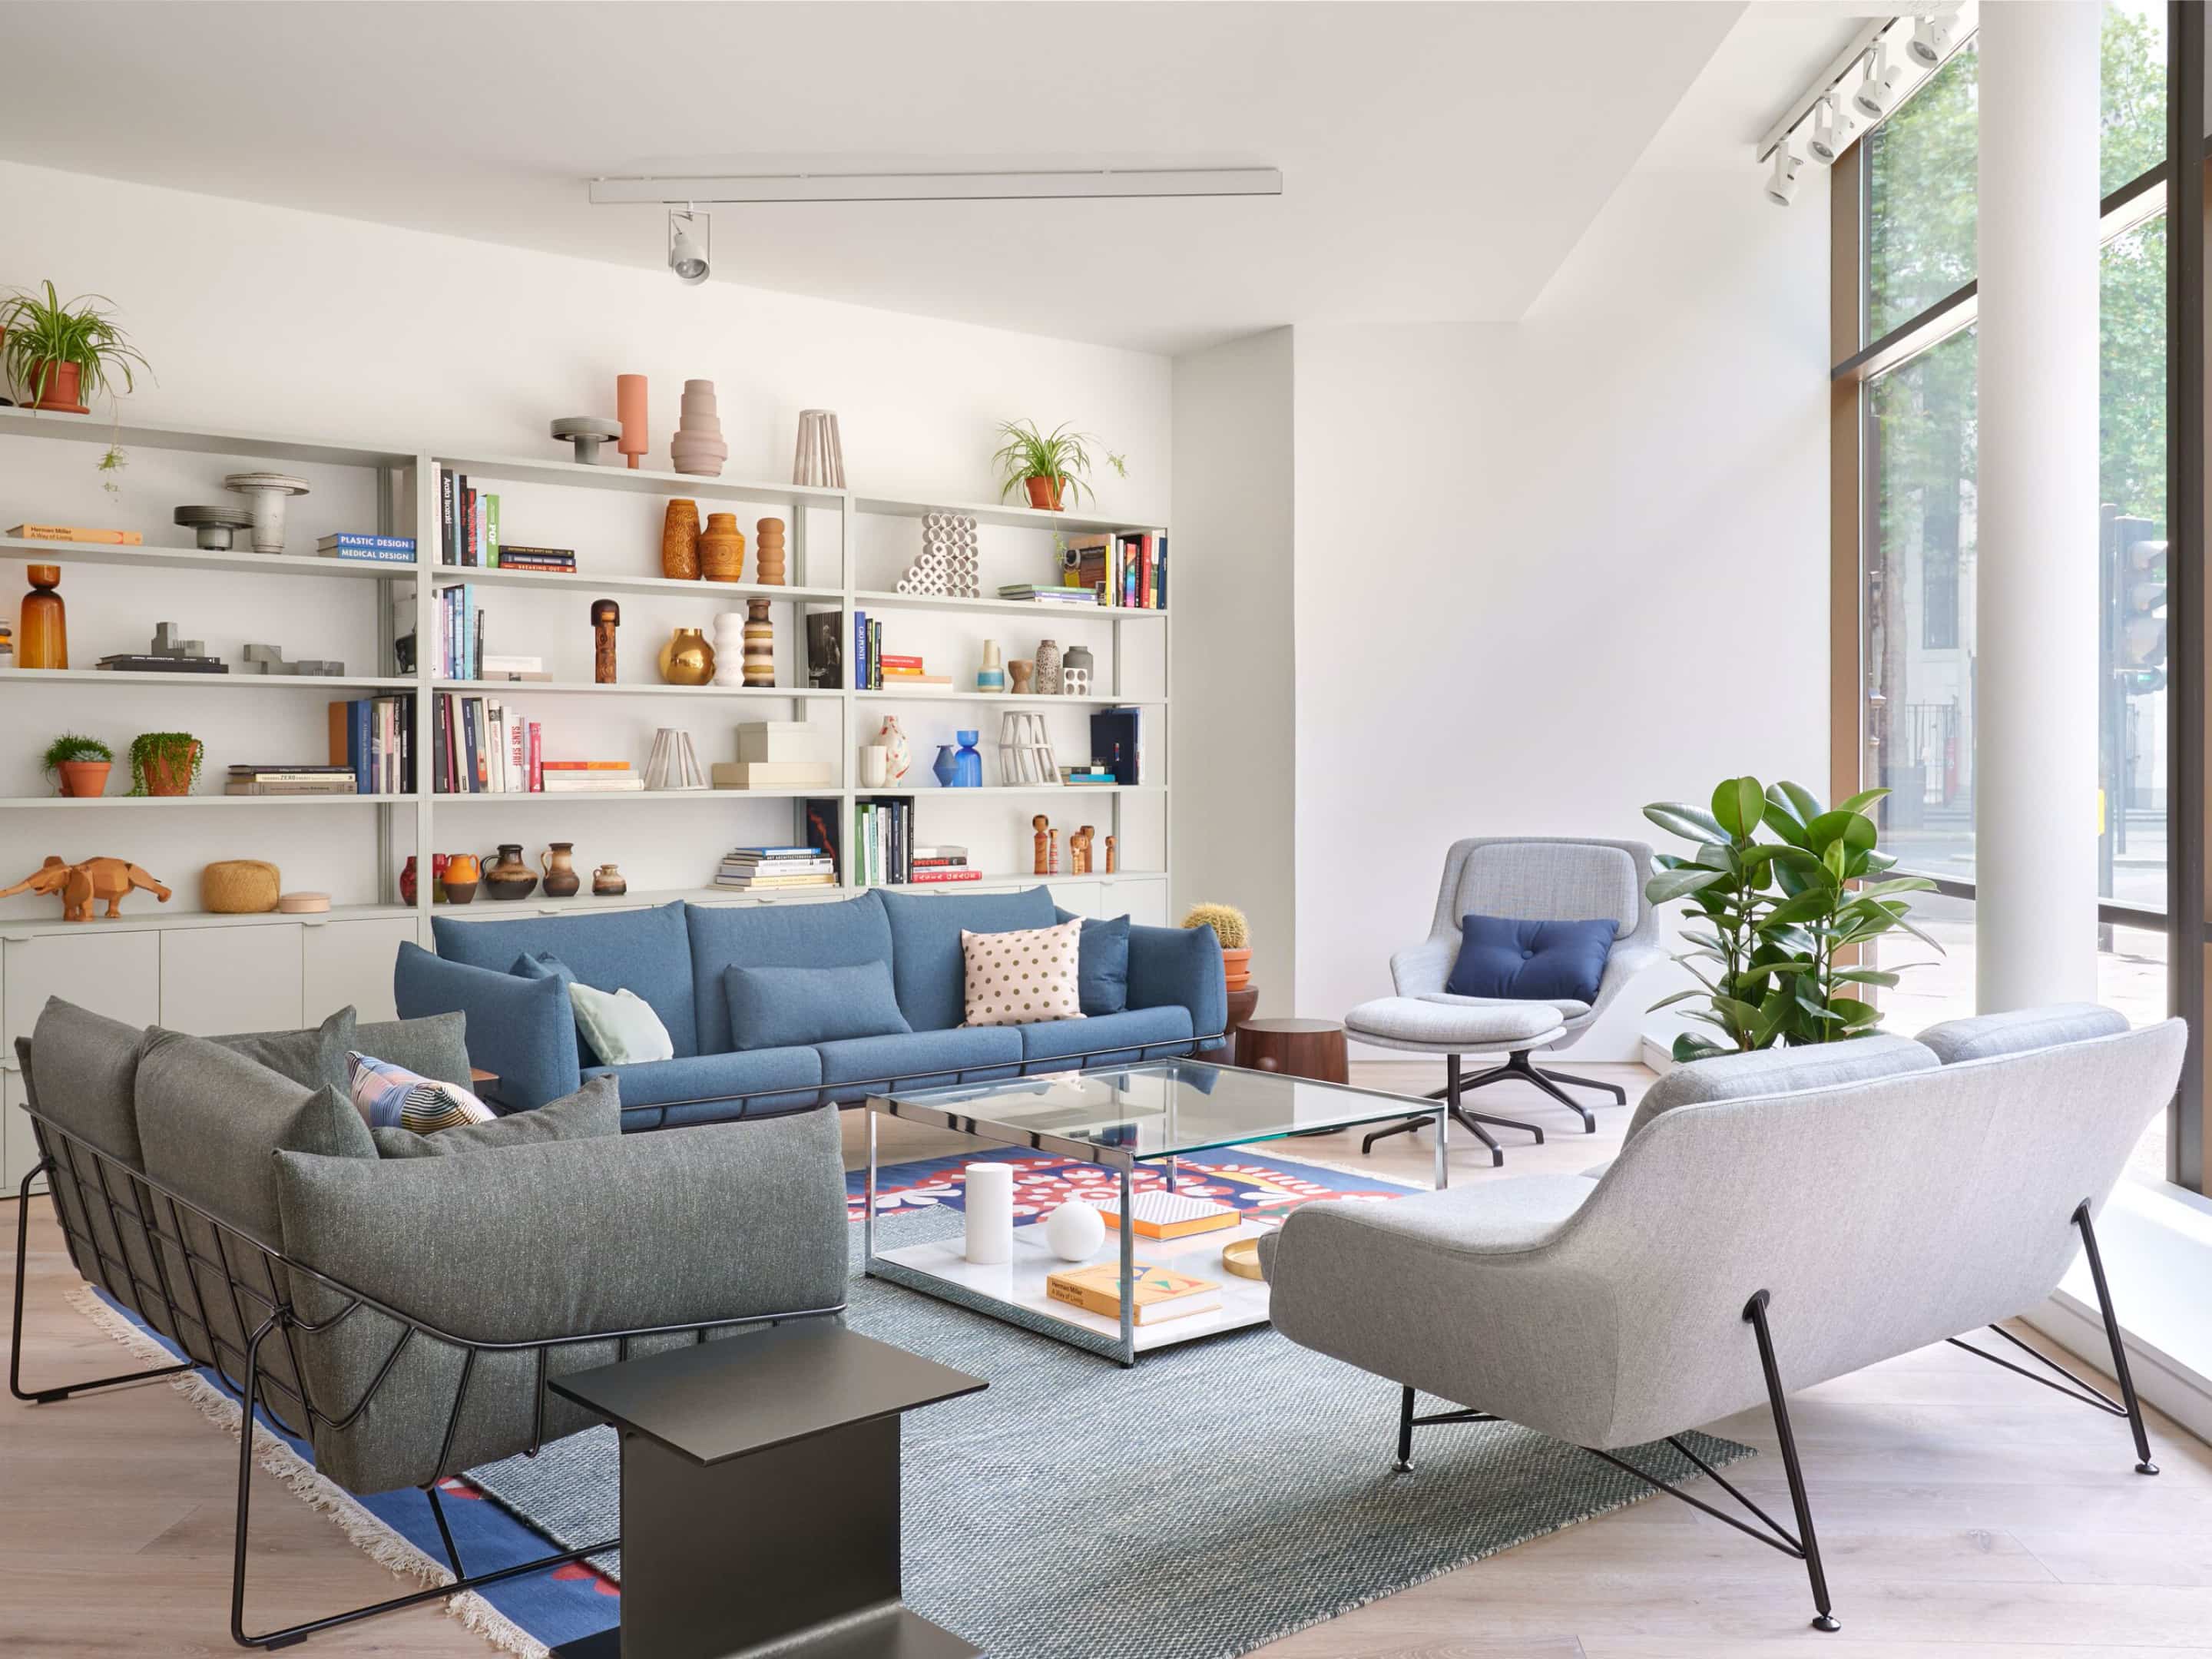 Collection of sofas, a lounge chair and side tables in front of a large bookcase.